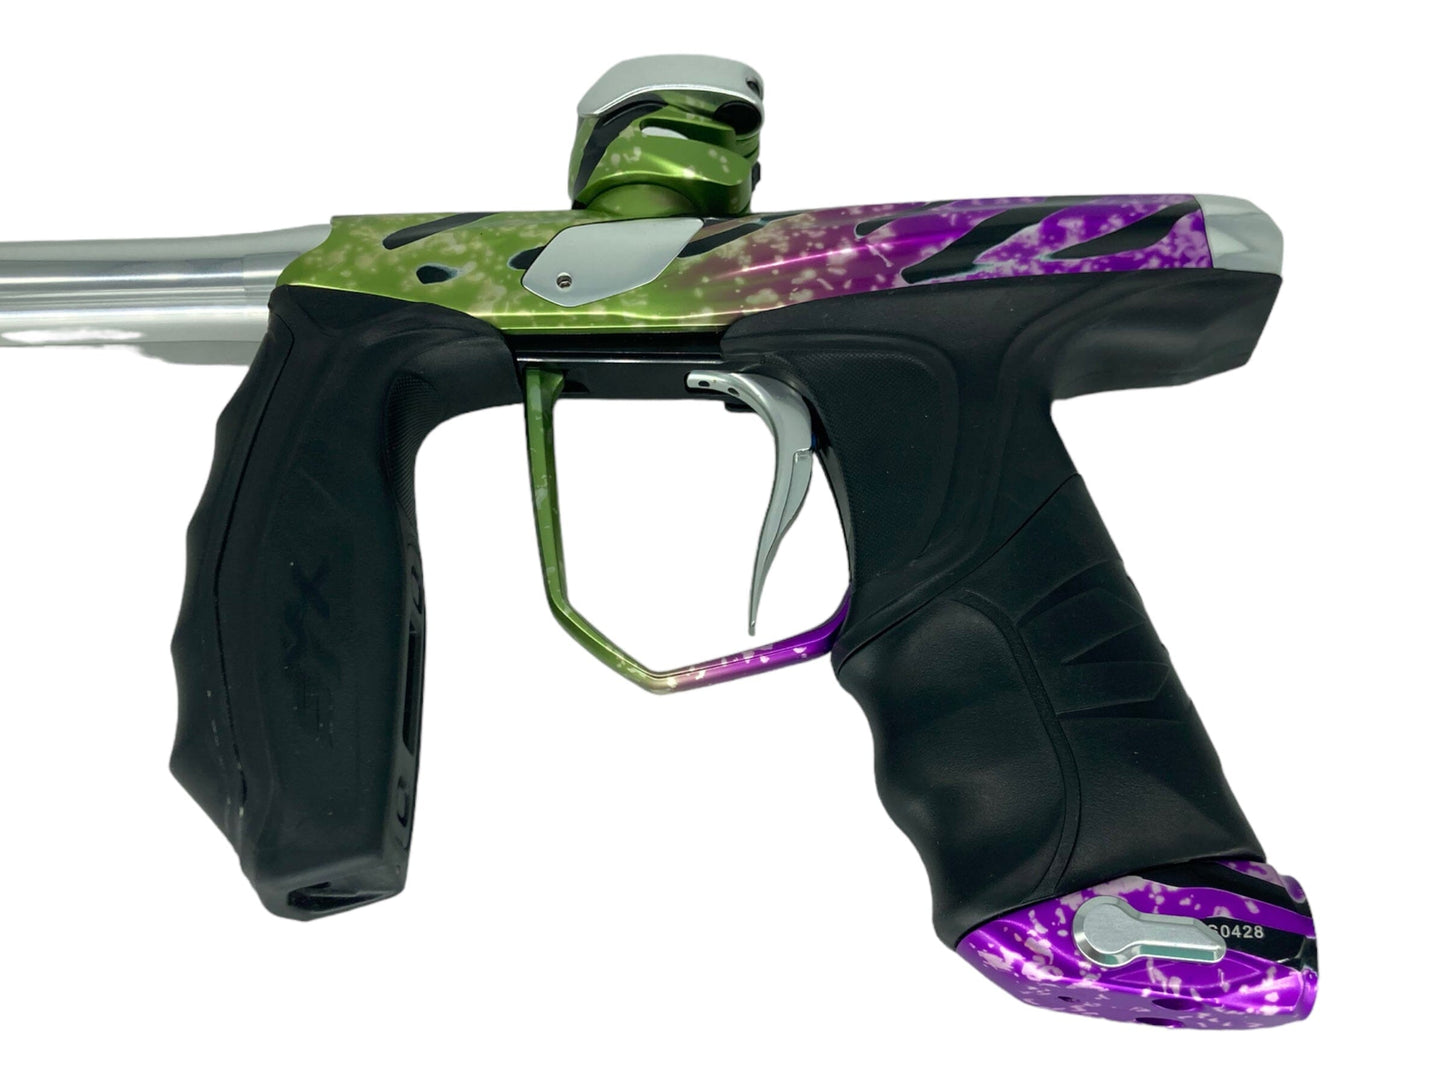 Used Empire Syx 1.5 Paintball Gun Paintball Gun from CPXBrosPaintball Buy/Sell/Trade Paintball Markers, New Paintball Guns, Paintball Hoppers, Paintball Masks, and Hormesis Headbands